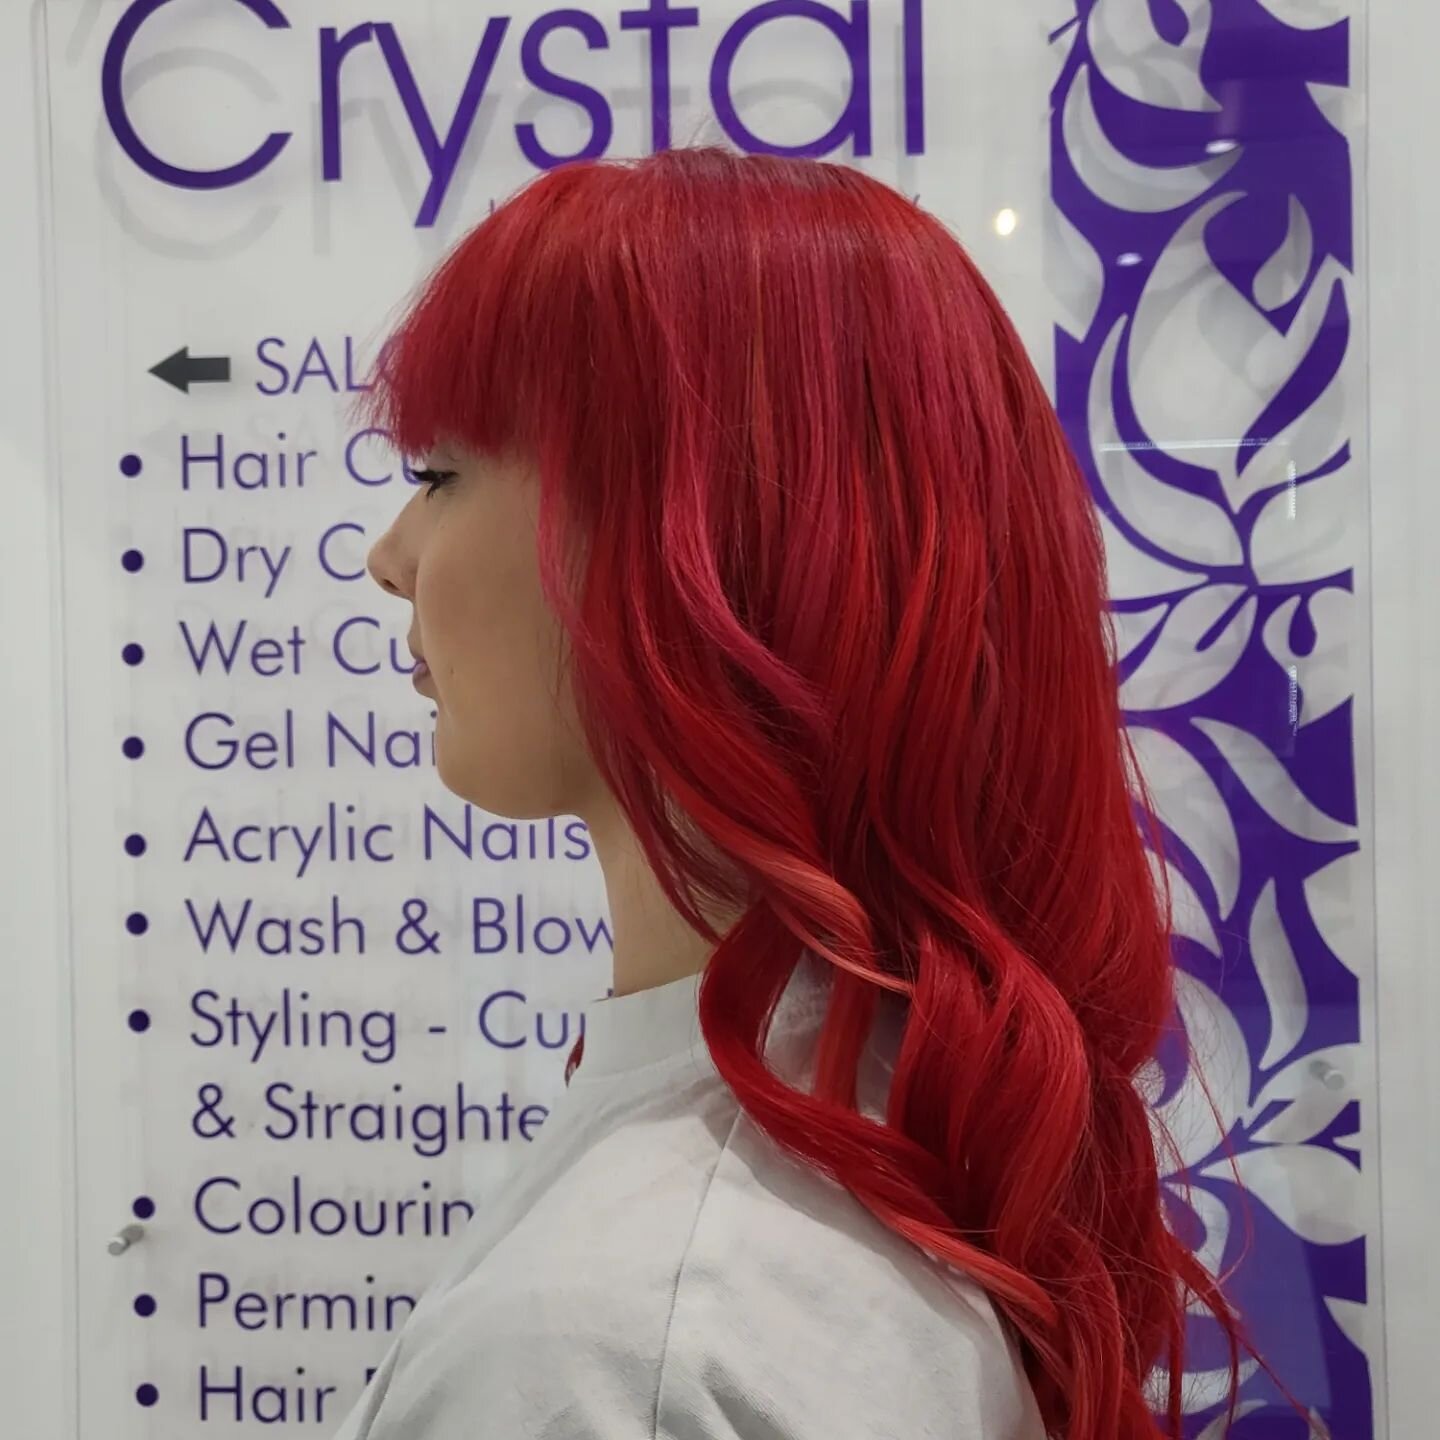 Hair Extensions fitting at Crystals by our very Senior Hair Tech Eva. #haircolouring #la #haircurling